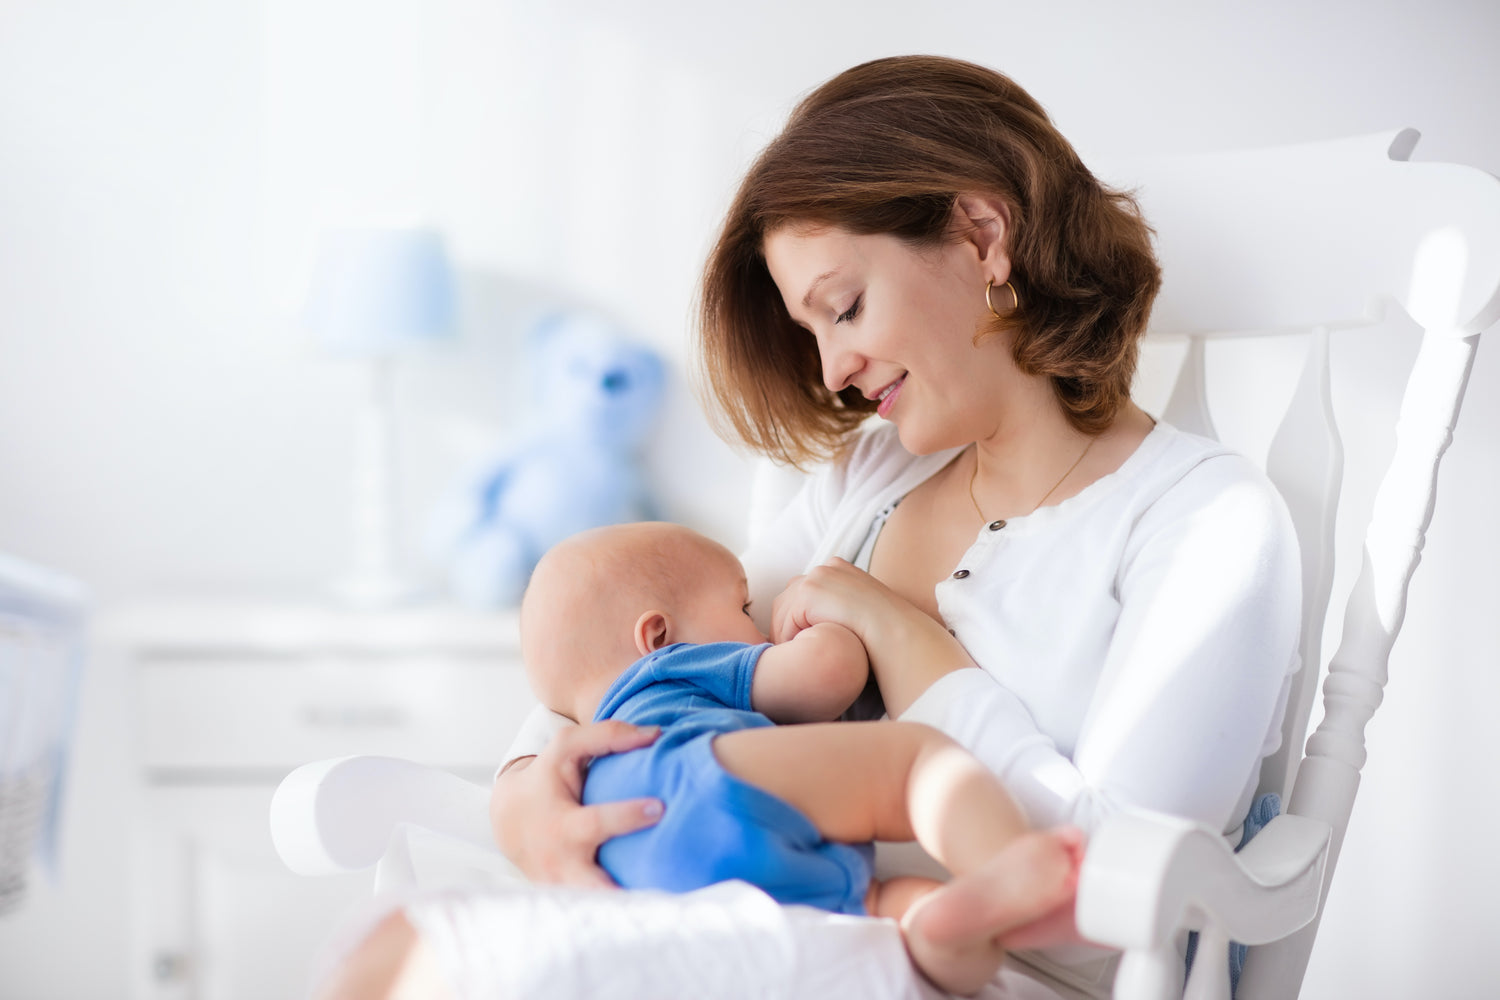 6 Useful Tips to Successful Breastfeeding for Nursing Moms